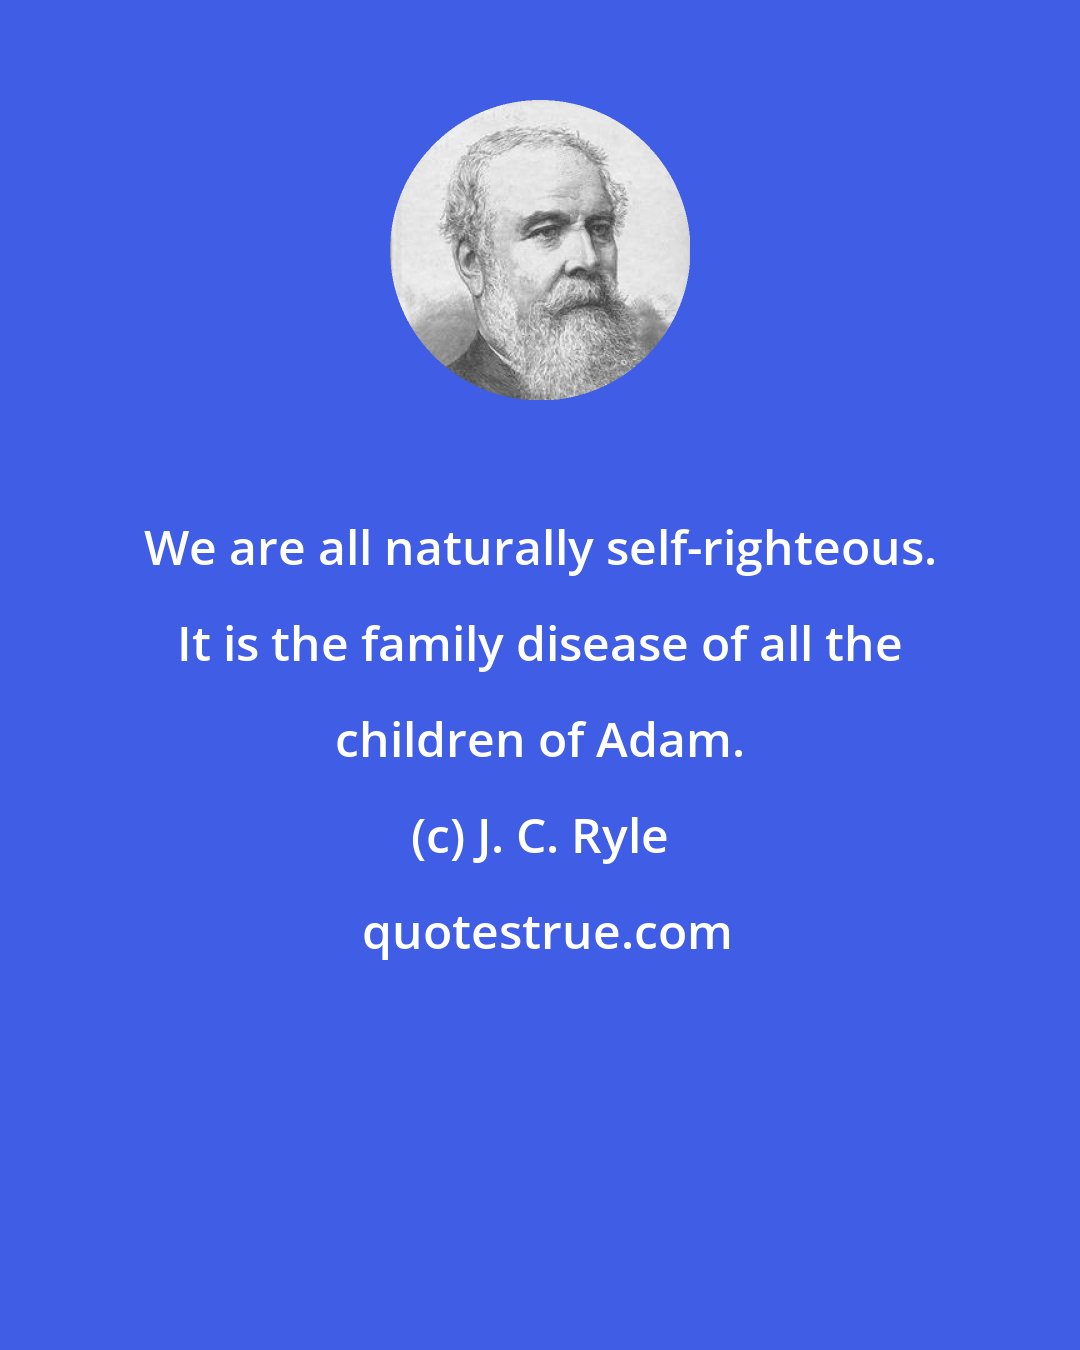 J. C. Ryle: We are all naturally self-righteous. It is the family disease of all the children of Adam.